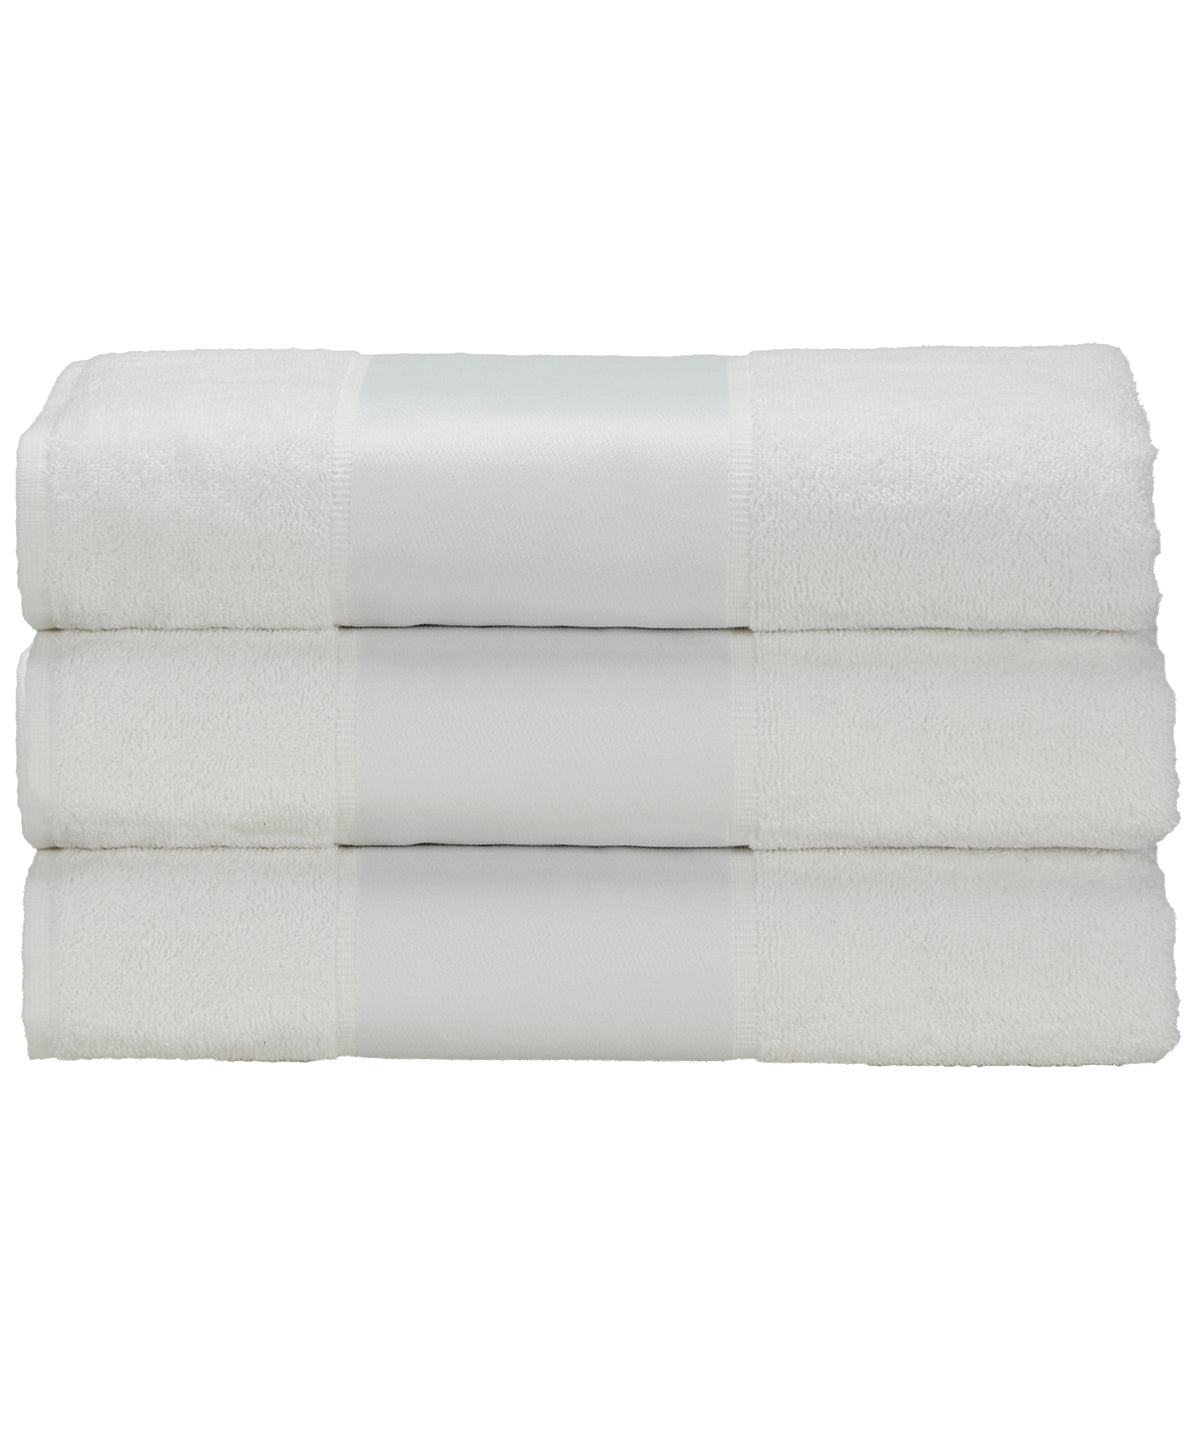 Personalised Towels - White A&R Towels ARTG® SUBLI-Me® hand towel